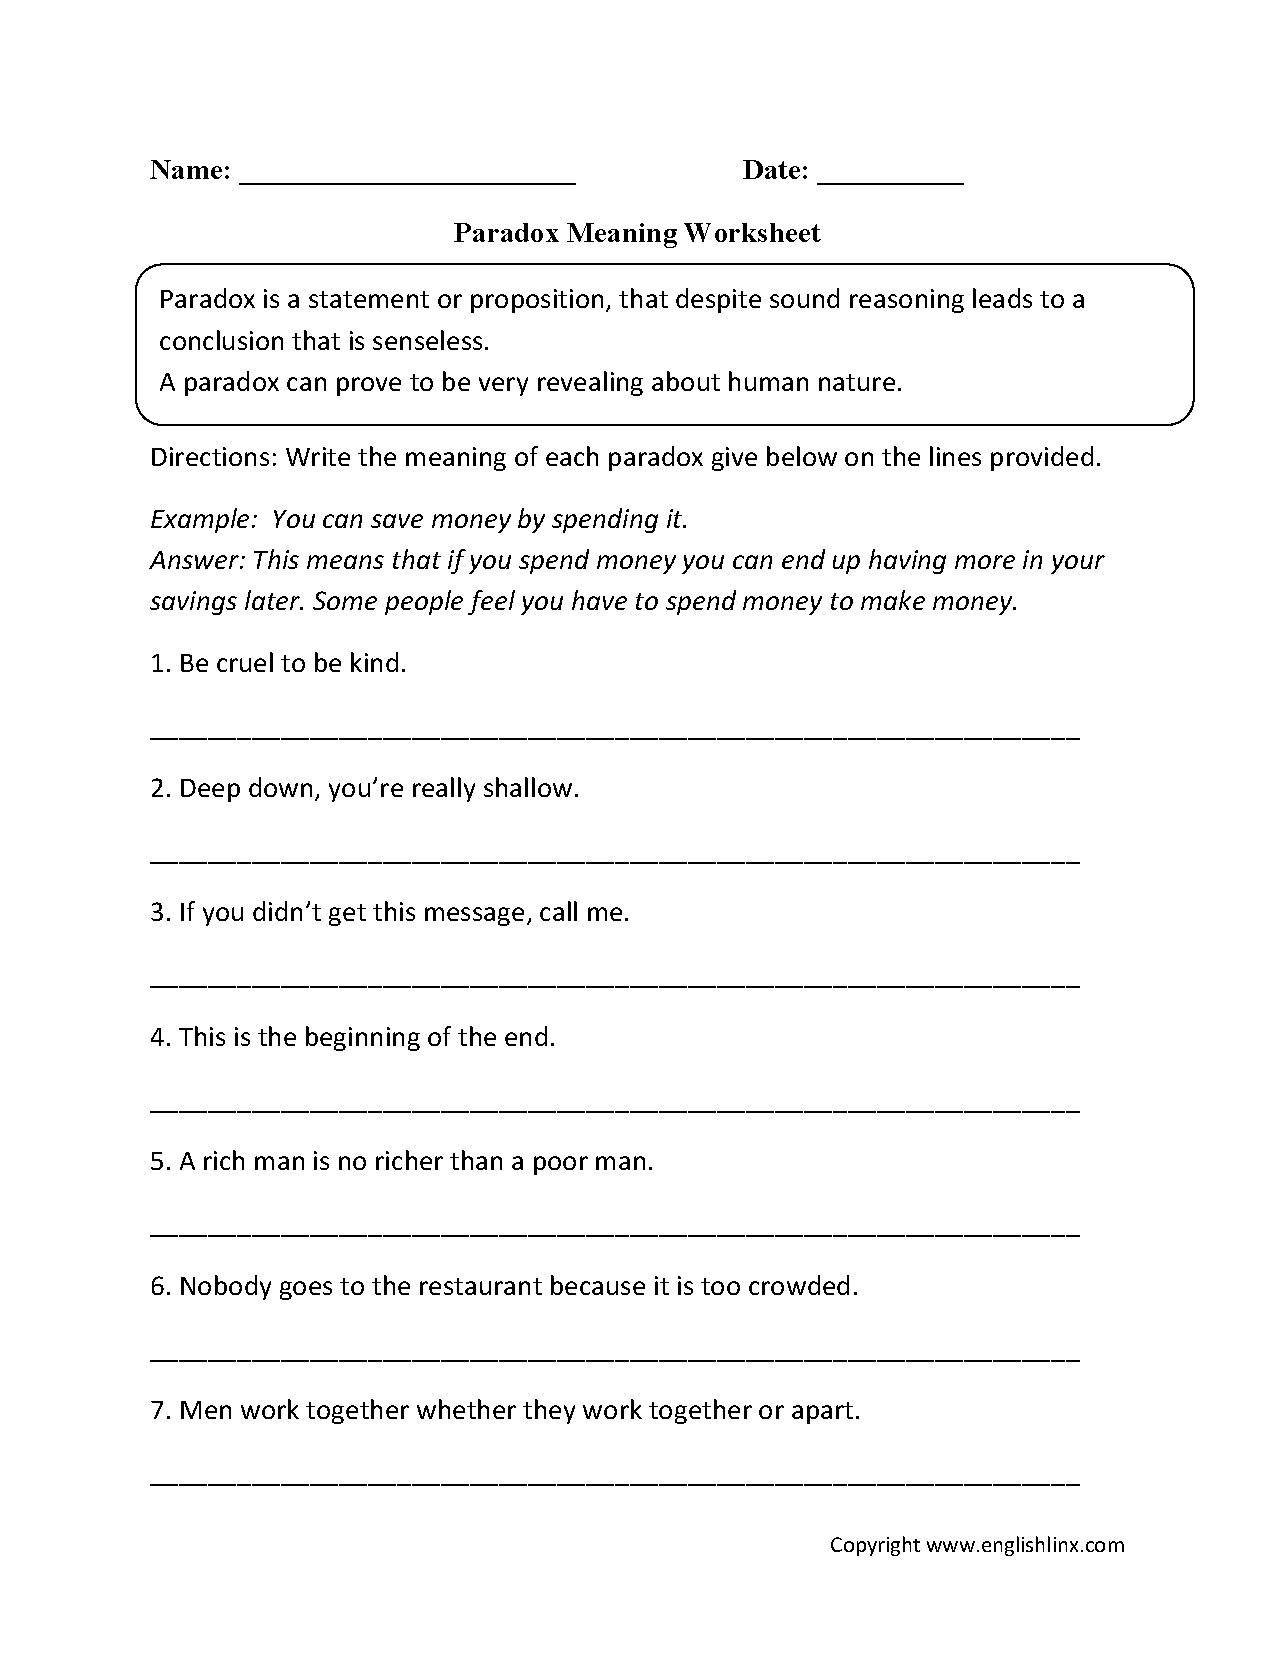 Warm Up To Paradox Worksheet Answers Figurative Language Worksheets Or Warm Up To Paradox Worksheet Answers